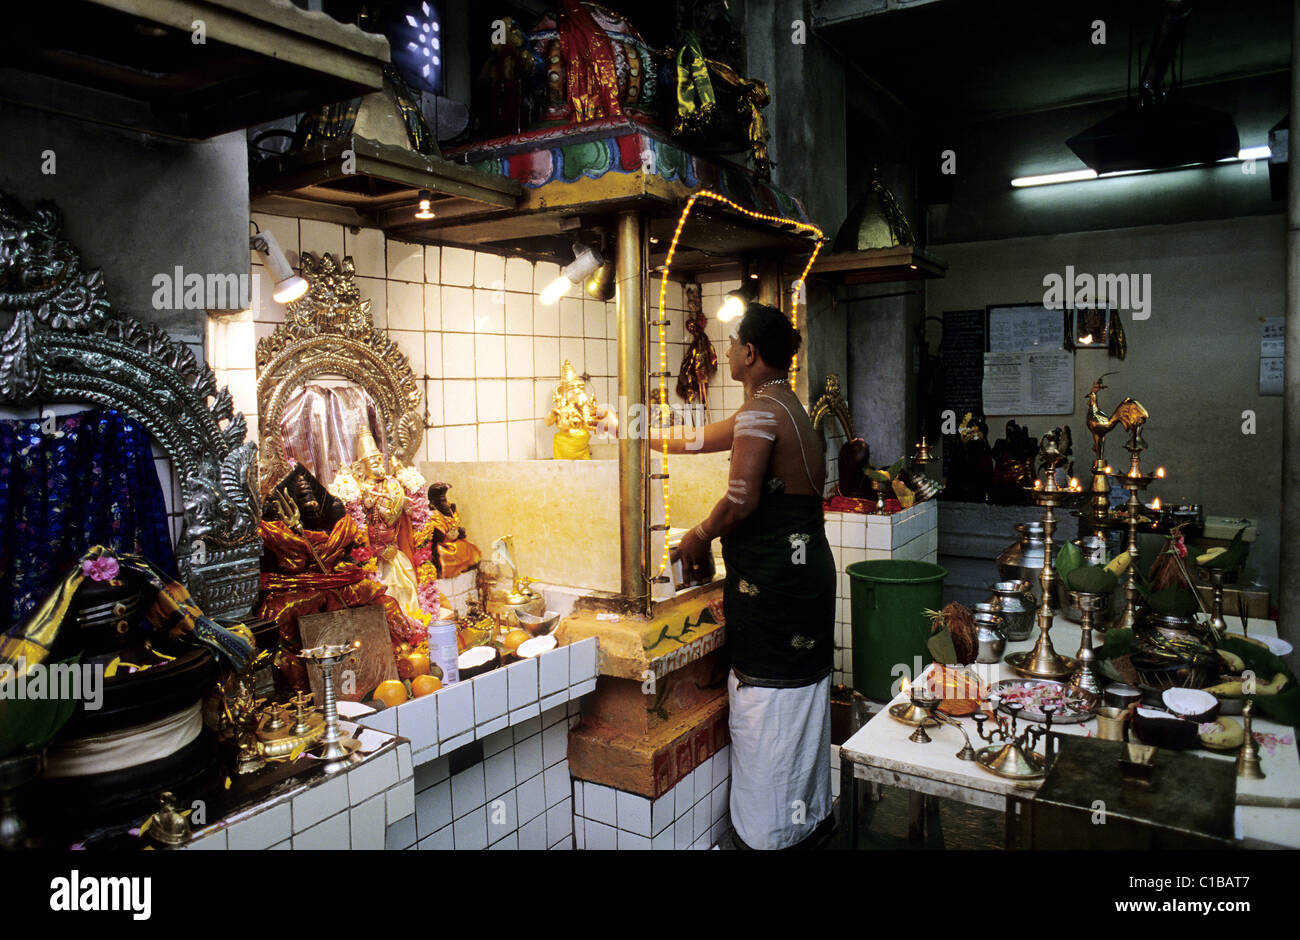 France, Paris, ritual ceremony in an Indian shrine Stock Photo